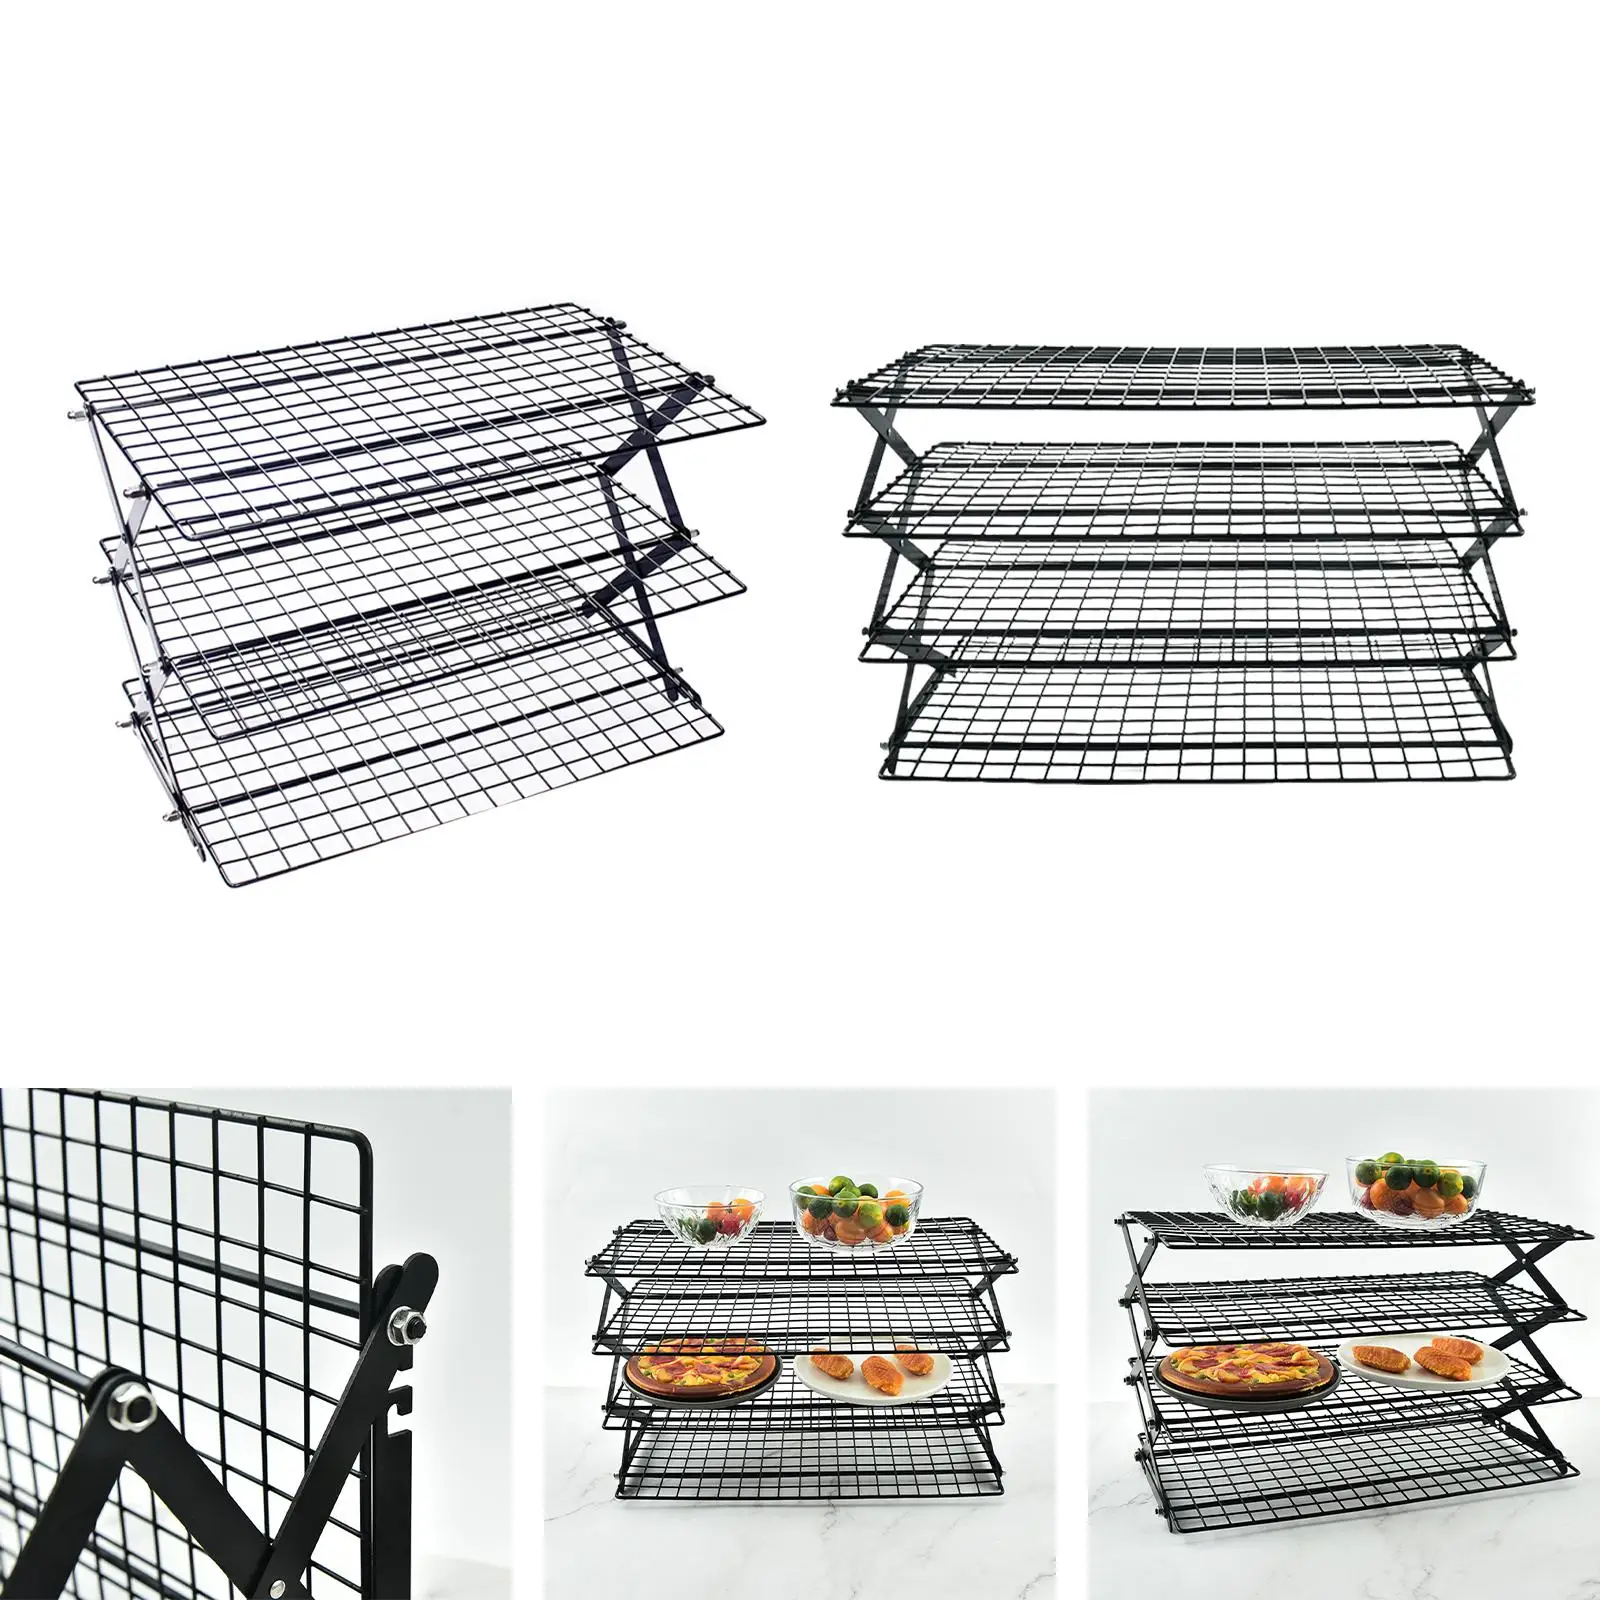 Foldable Camping Food Stand Rack Multi Tiers Rustproof Baking Cooling Rack for Yard Party Picnic Hotel Indoor Outdoor Restaurant